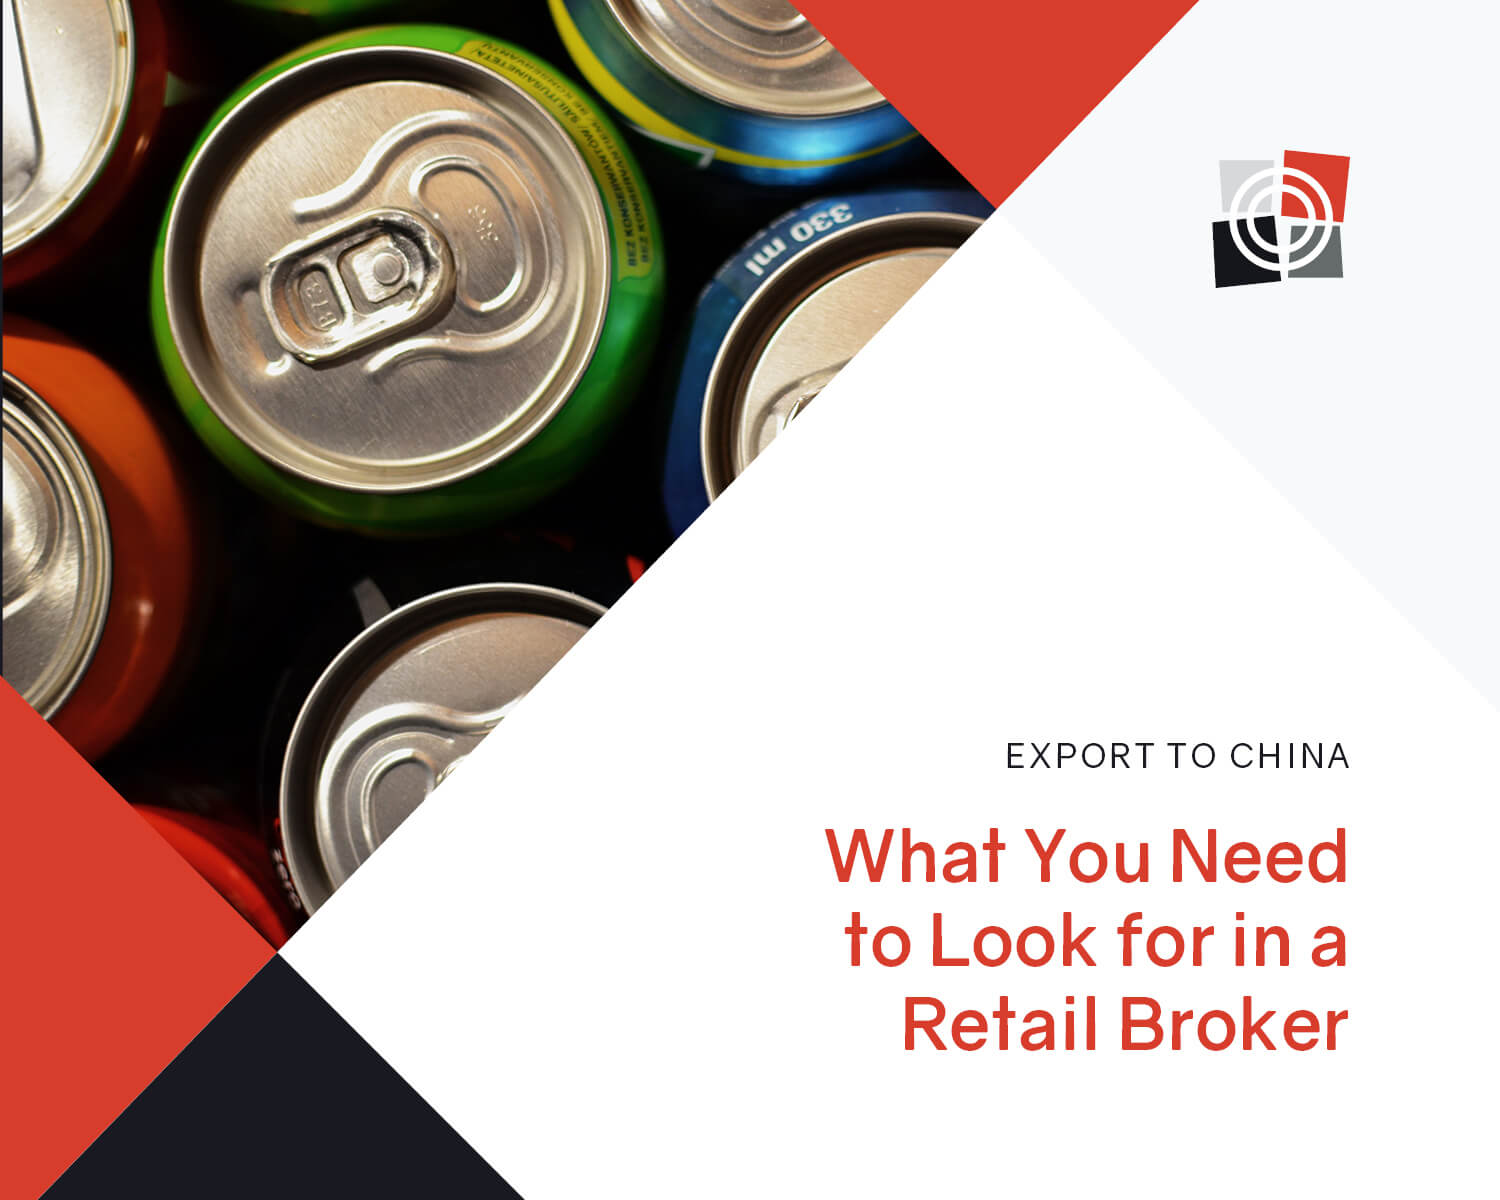 Export to China – What You Need to Look for in a Retail Broker